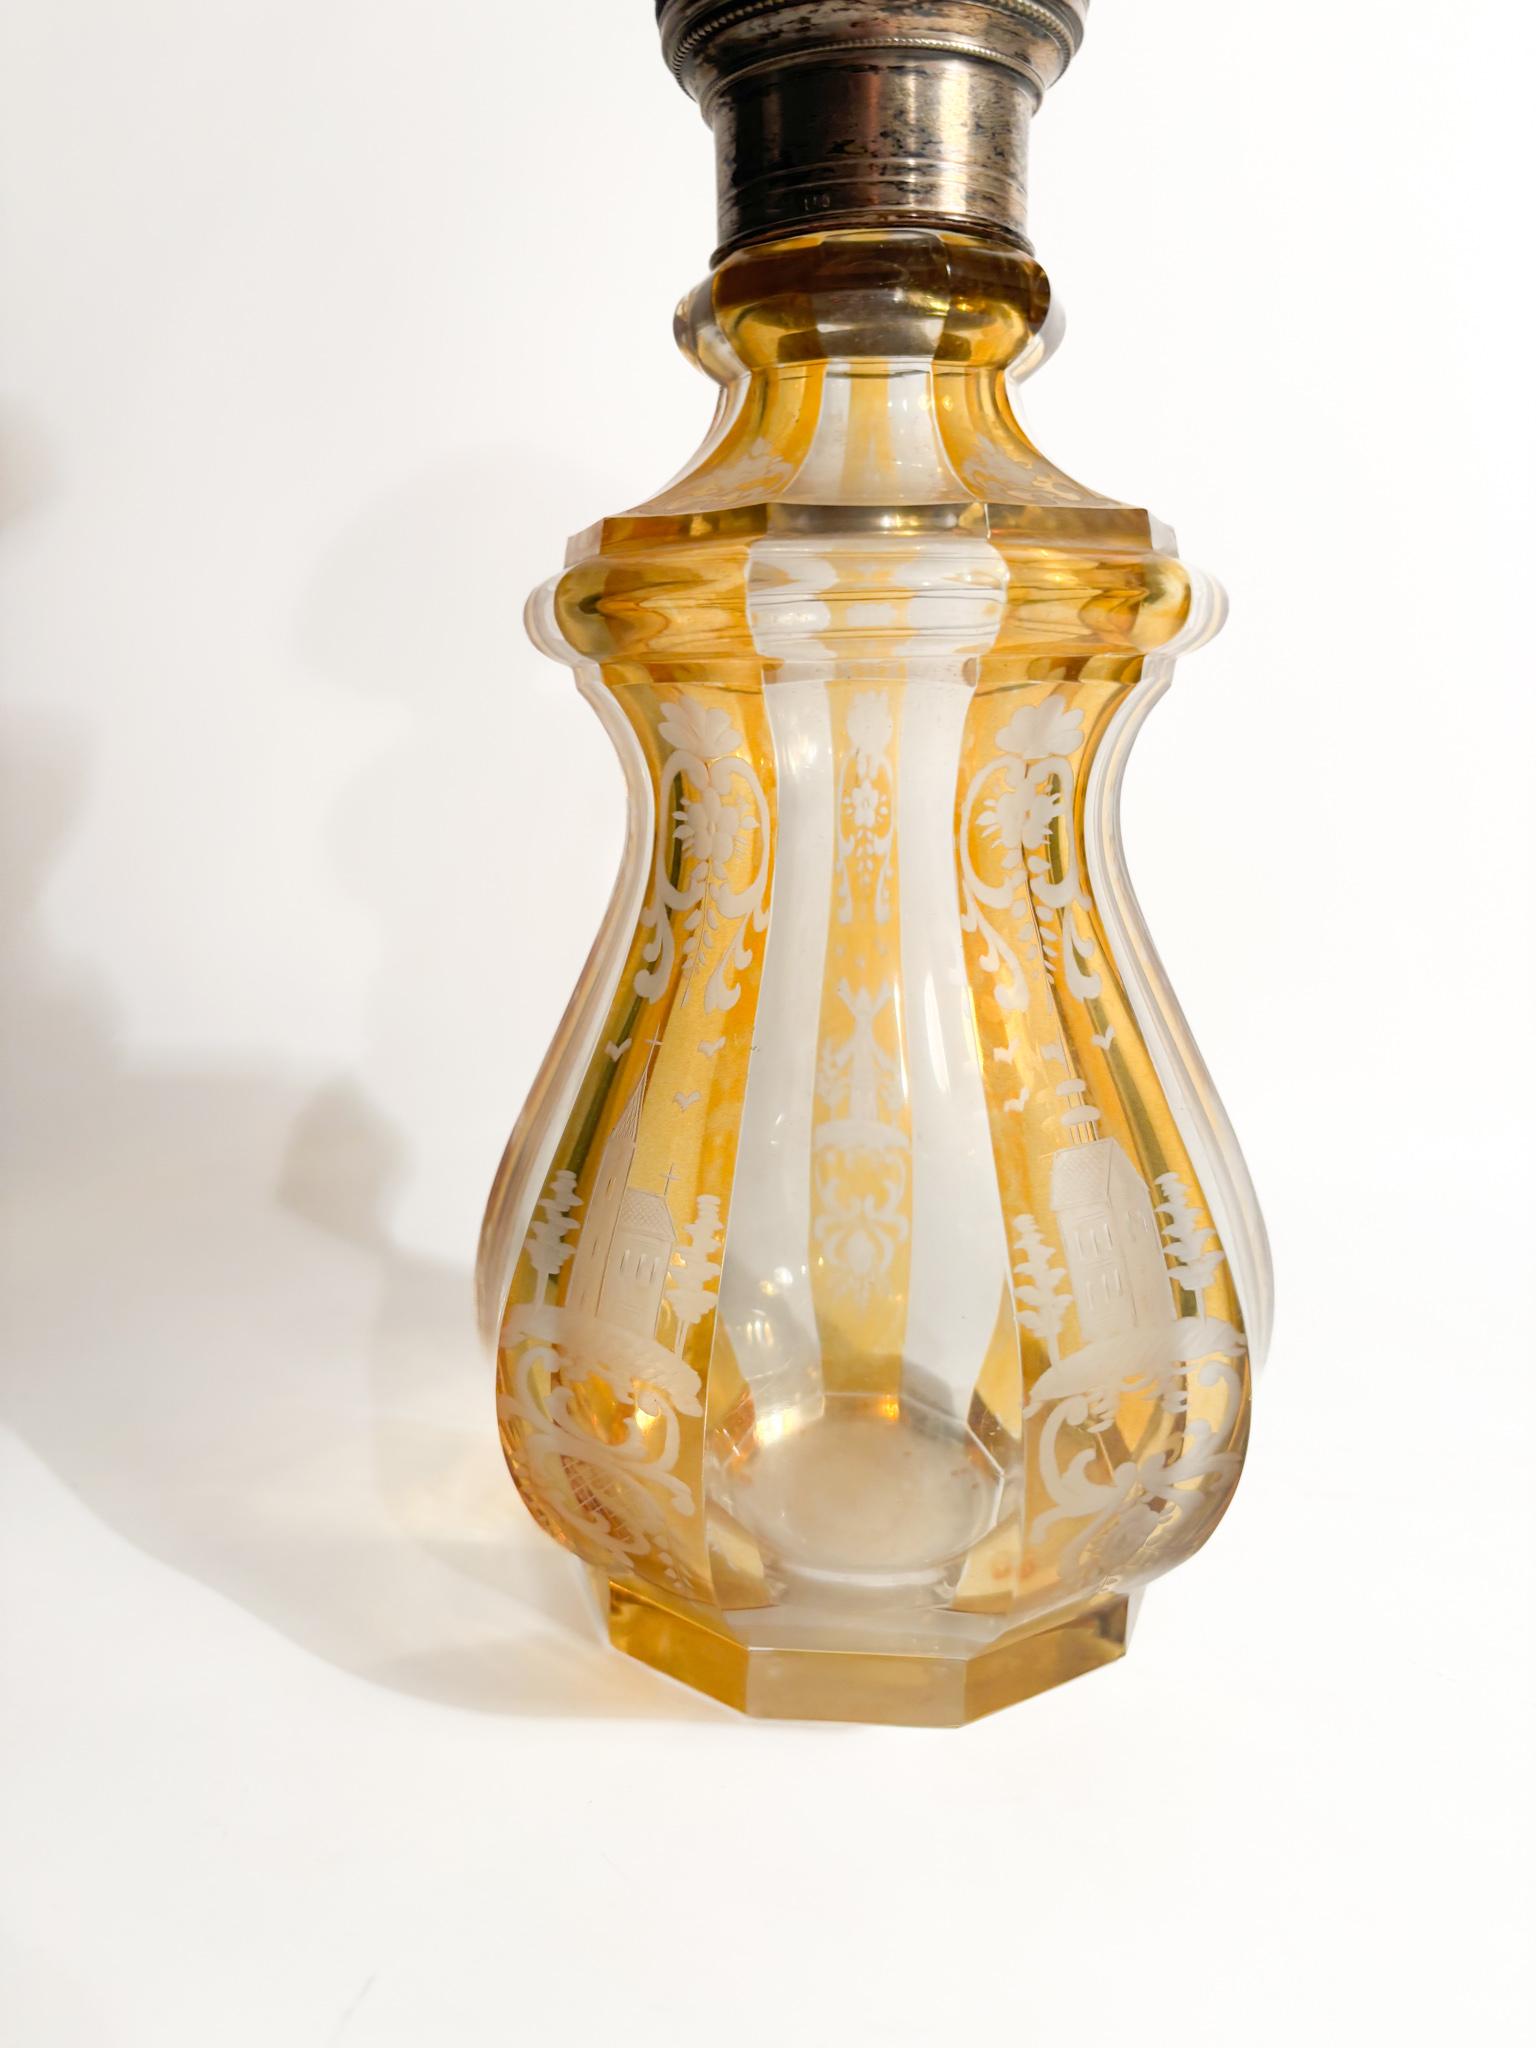 Late 19th Century Orange and Silver Biedermeier Crystal Bottle from 1800